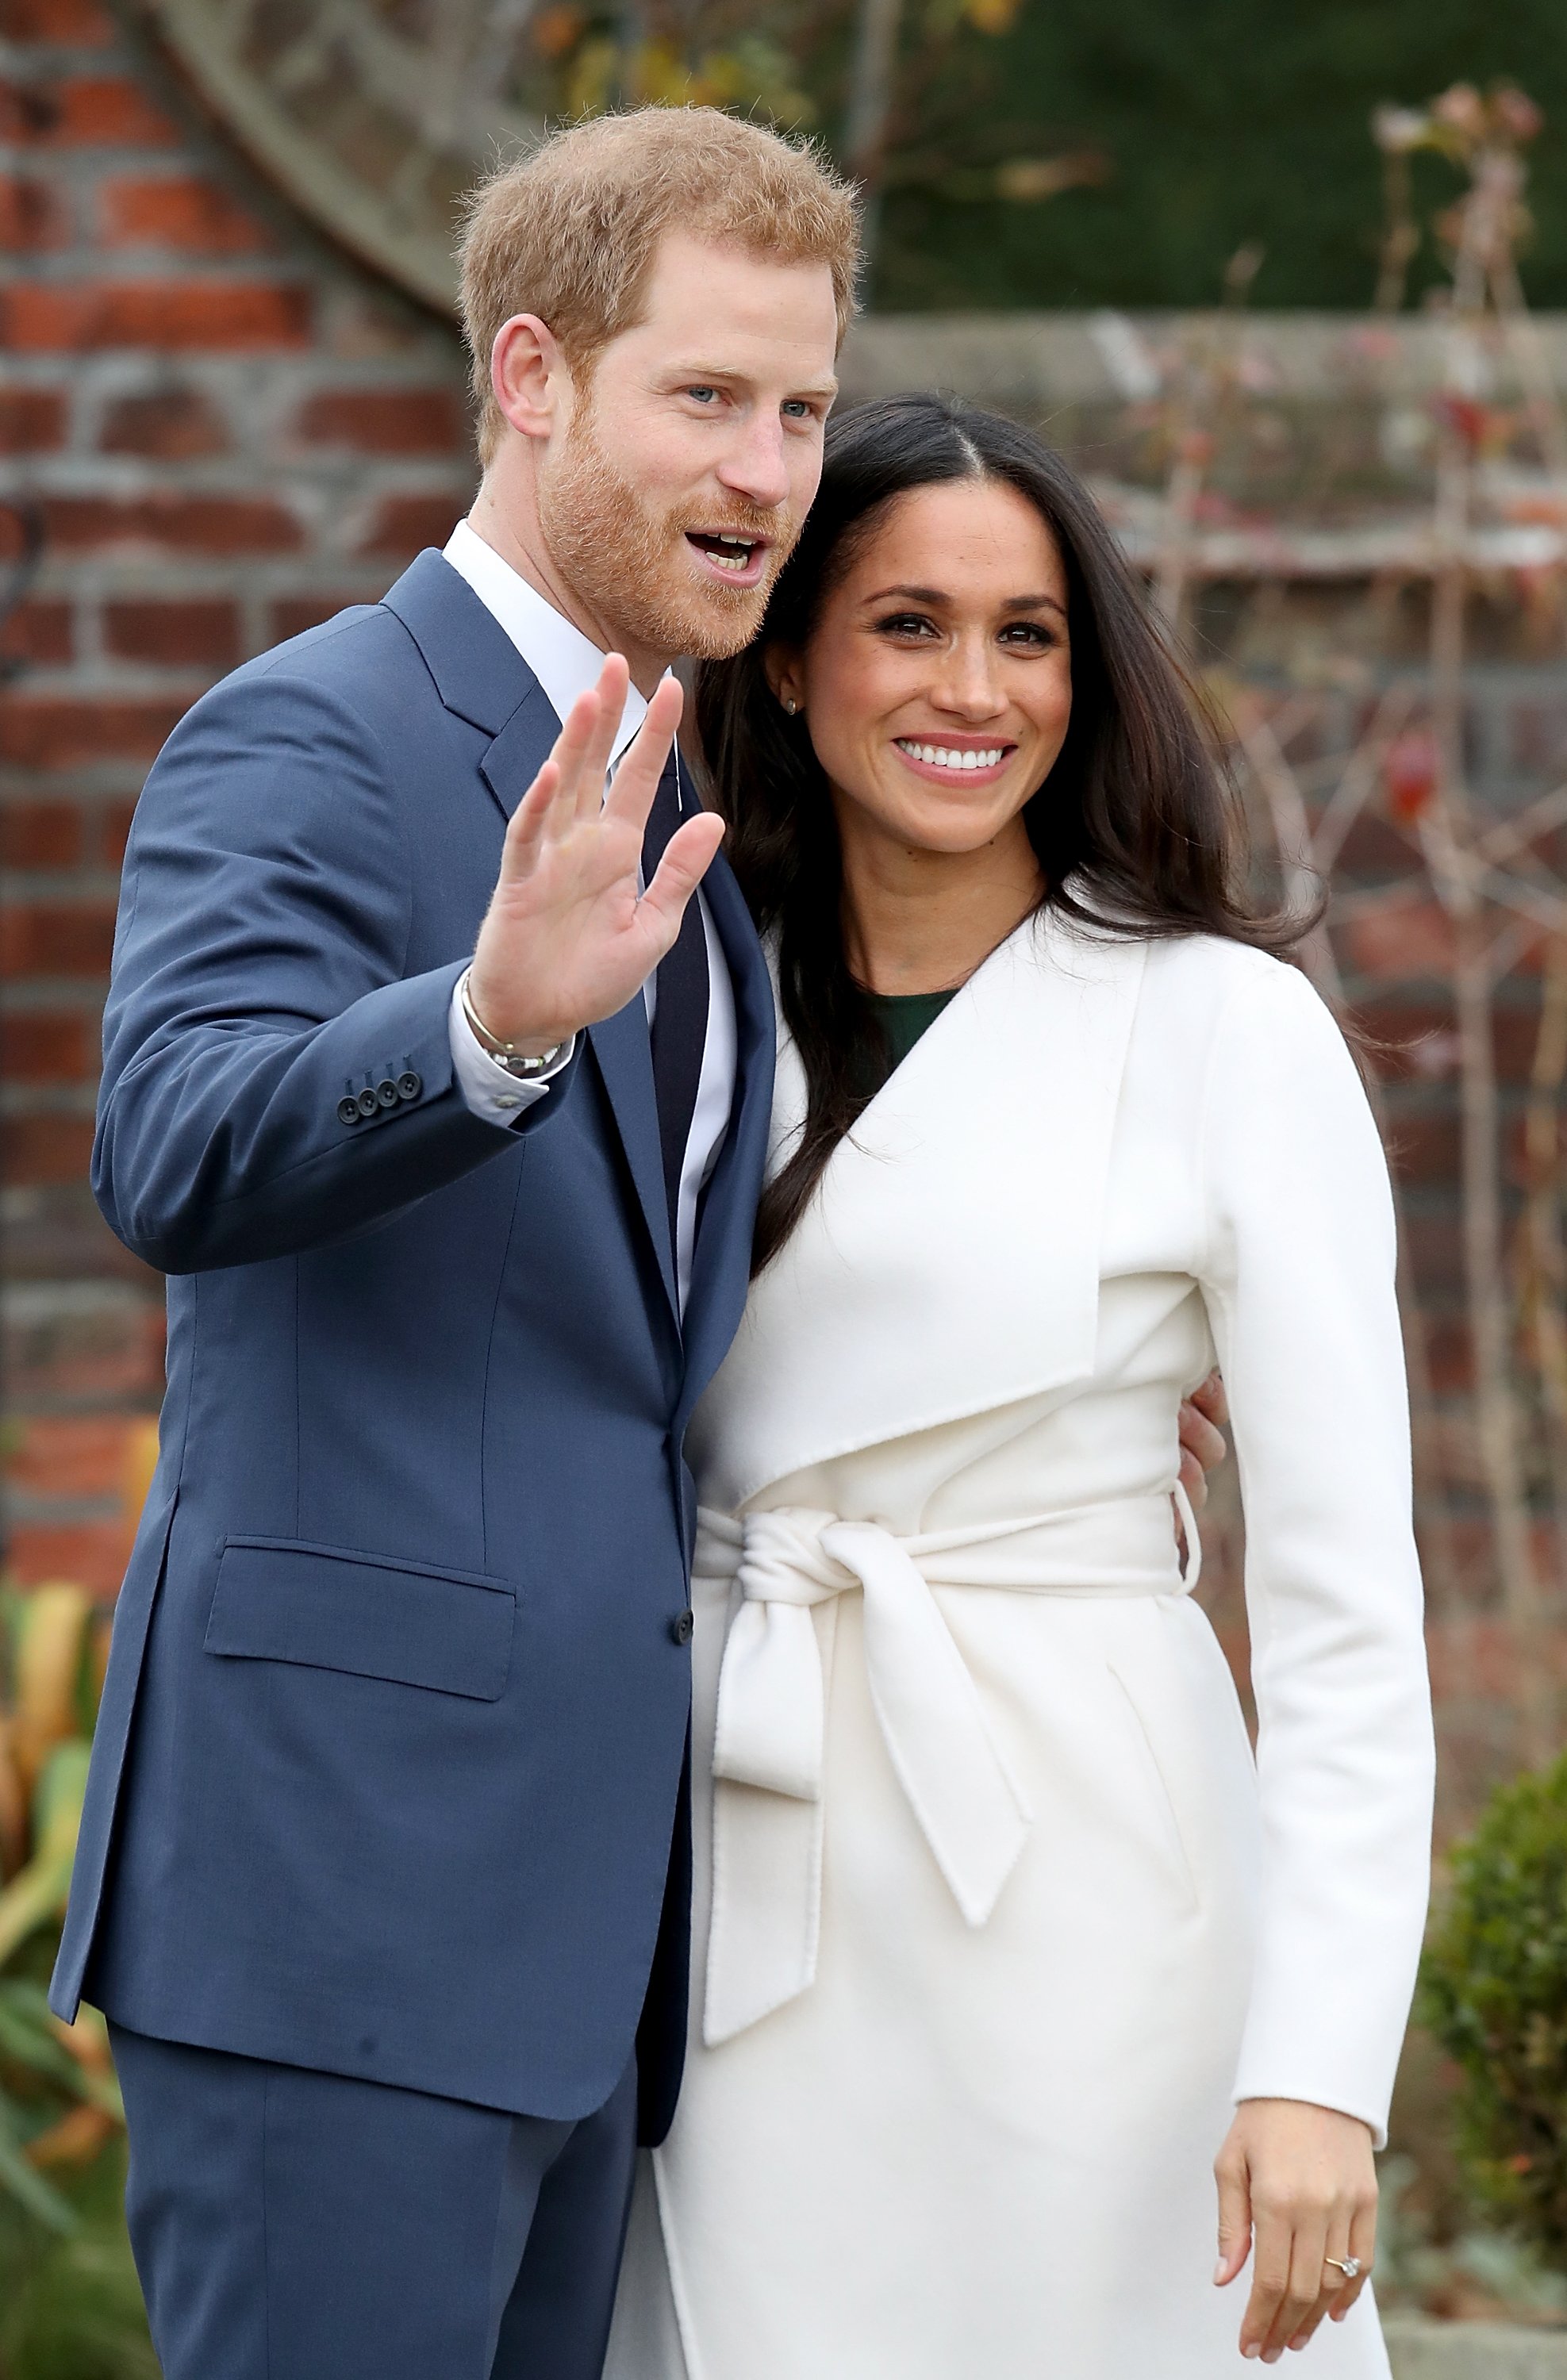 Prince Harry and Meghan Markle during an official photocall to announce their engagement at The Sunken Gardens at Kensington Palace on November 27, 2017. | Source: Getty Images